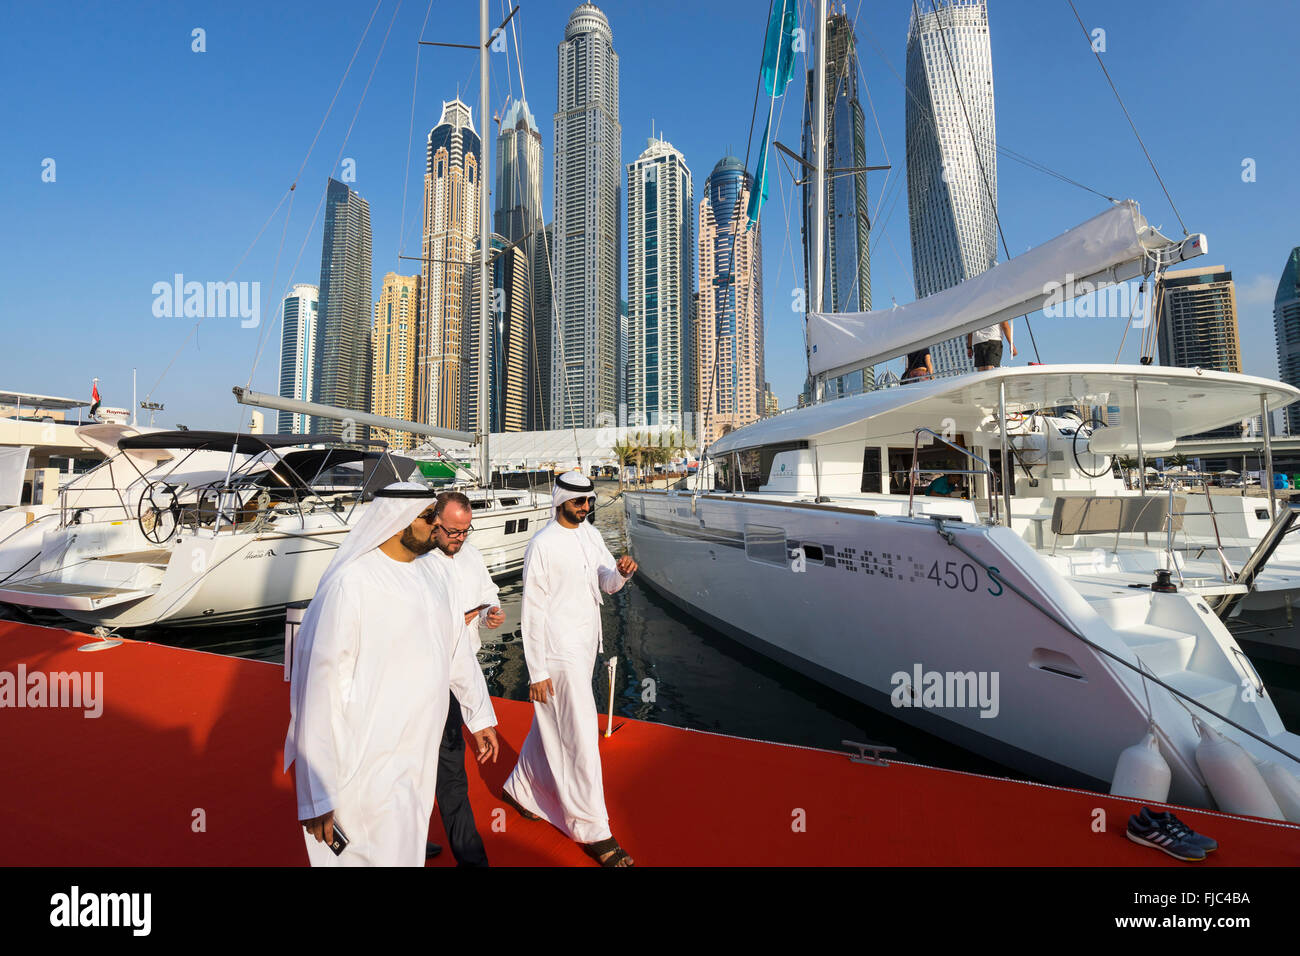 Luxury yachts on display on the opening day of the Dubai International Boat Show 2016 Stock Photo